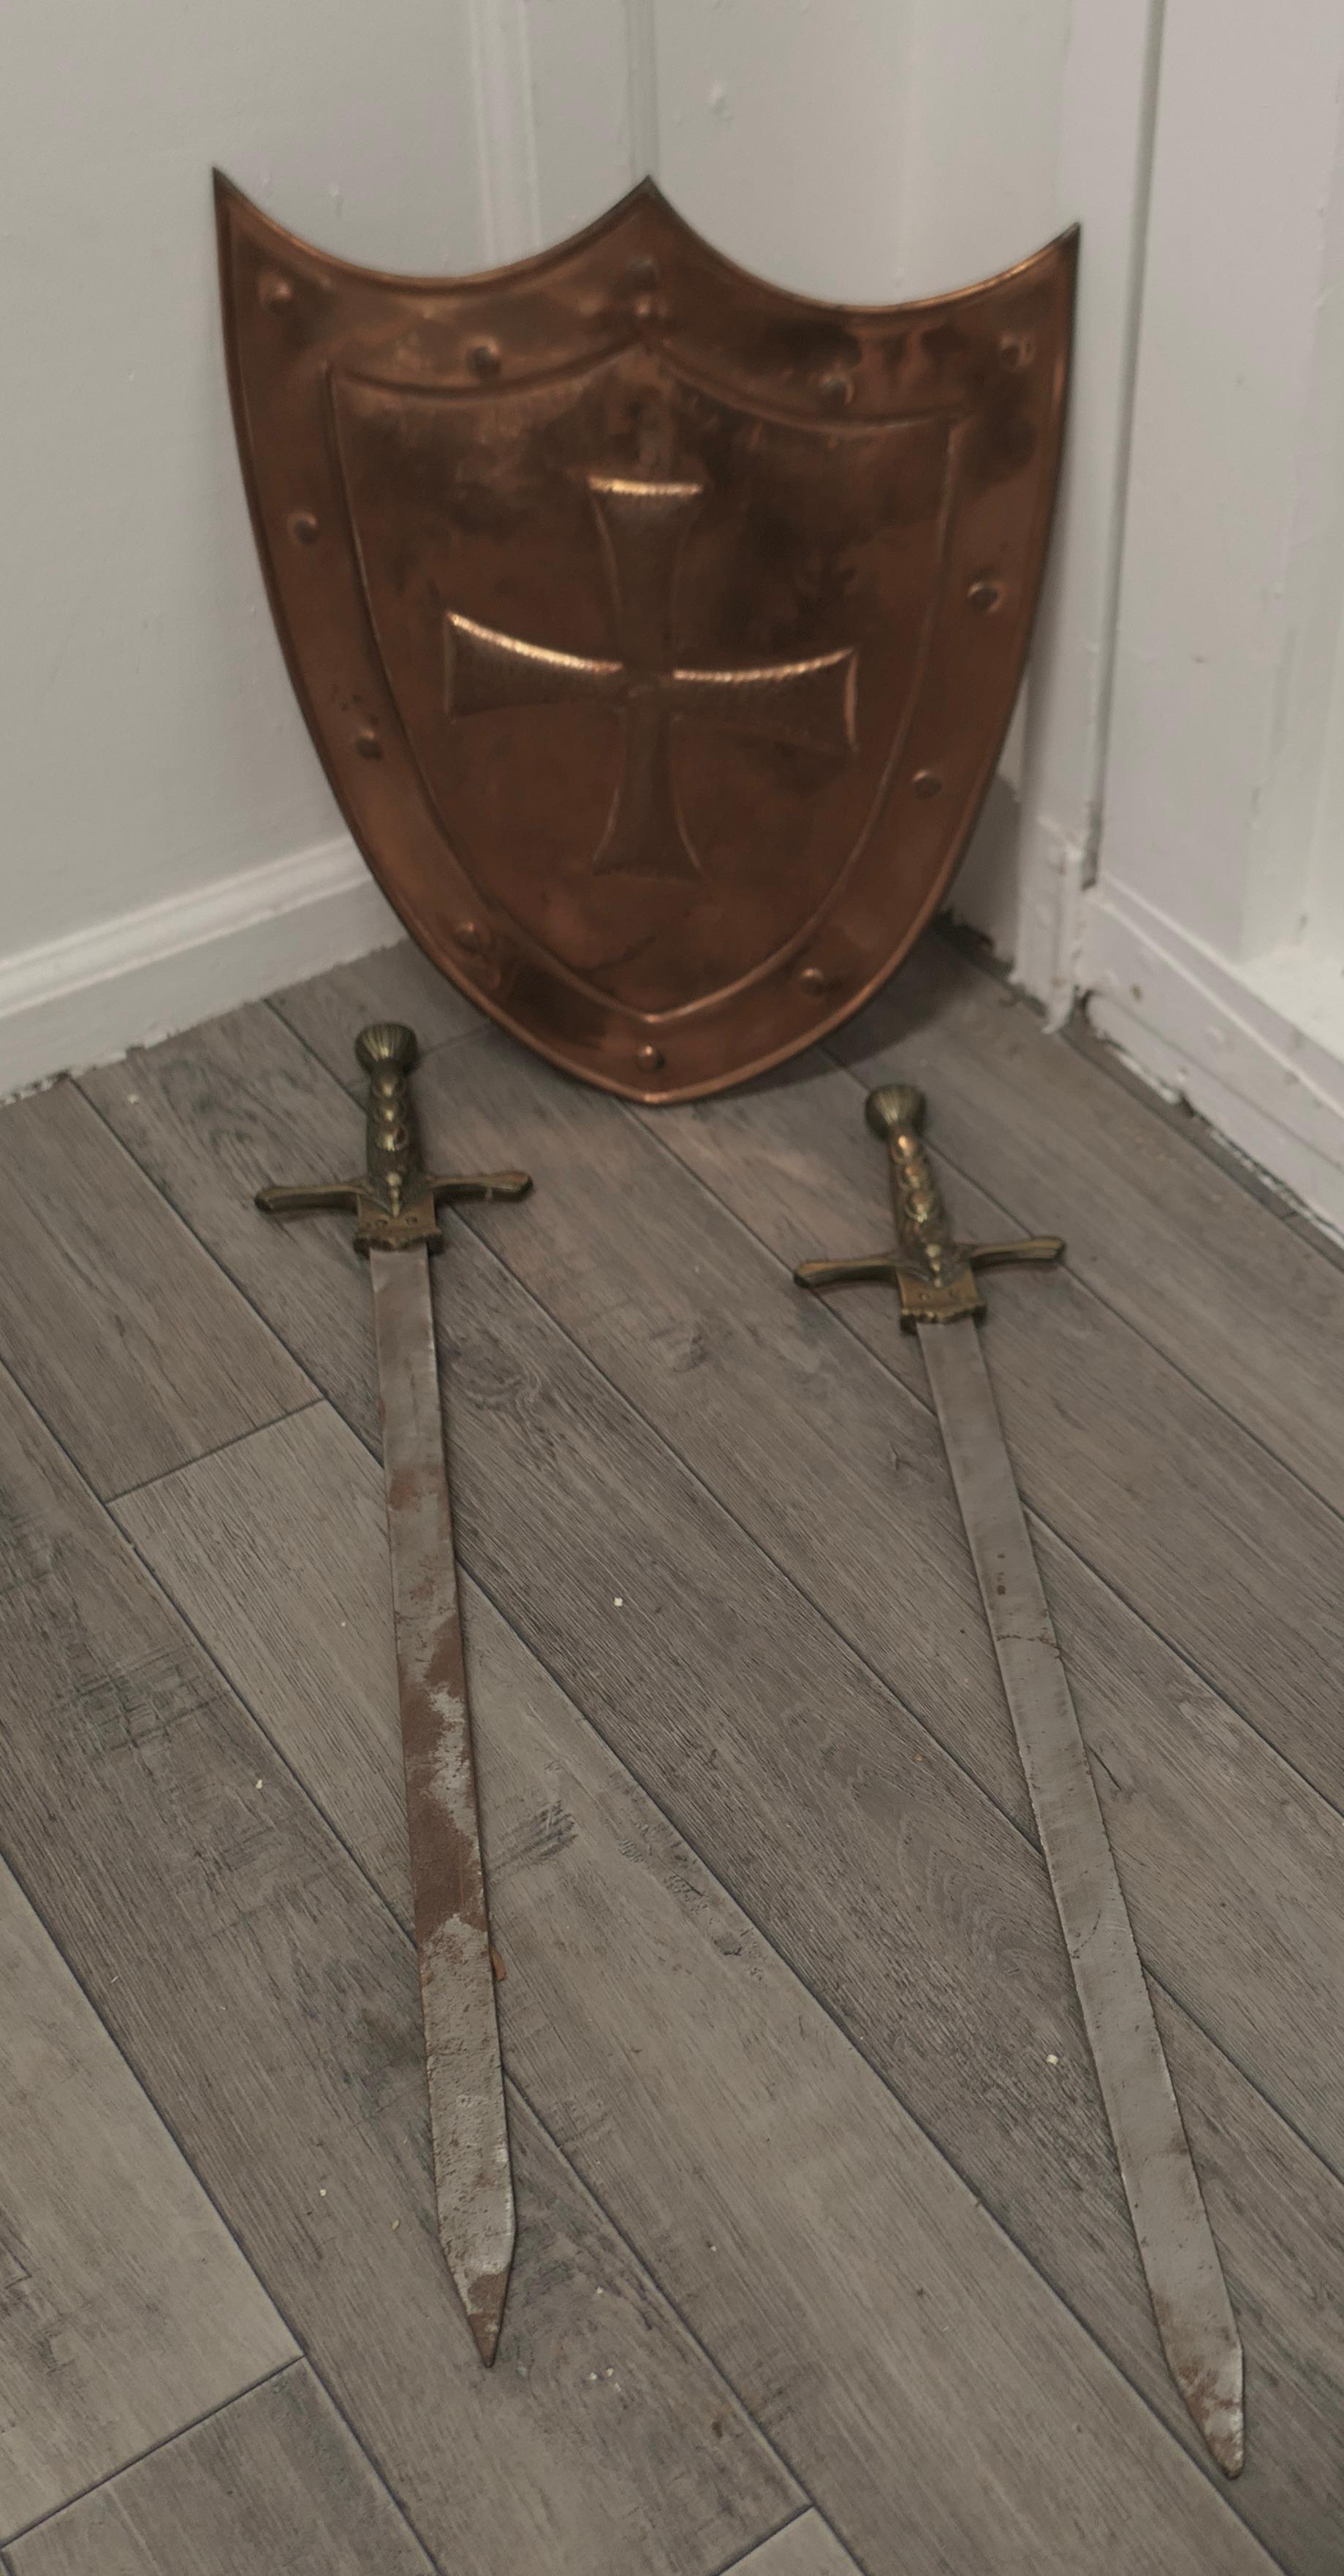 Wall Hanging Arts and Crafts Copper Shield with Cross Swords In Good Condition For Sale In Chillerton, Isle of Wight